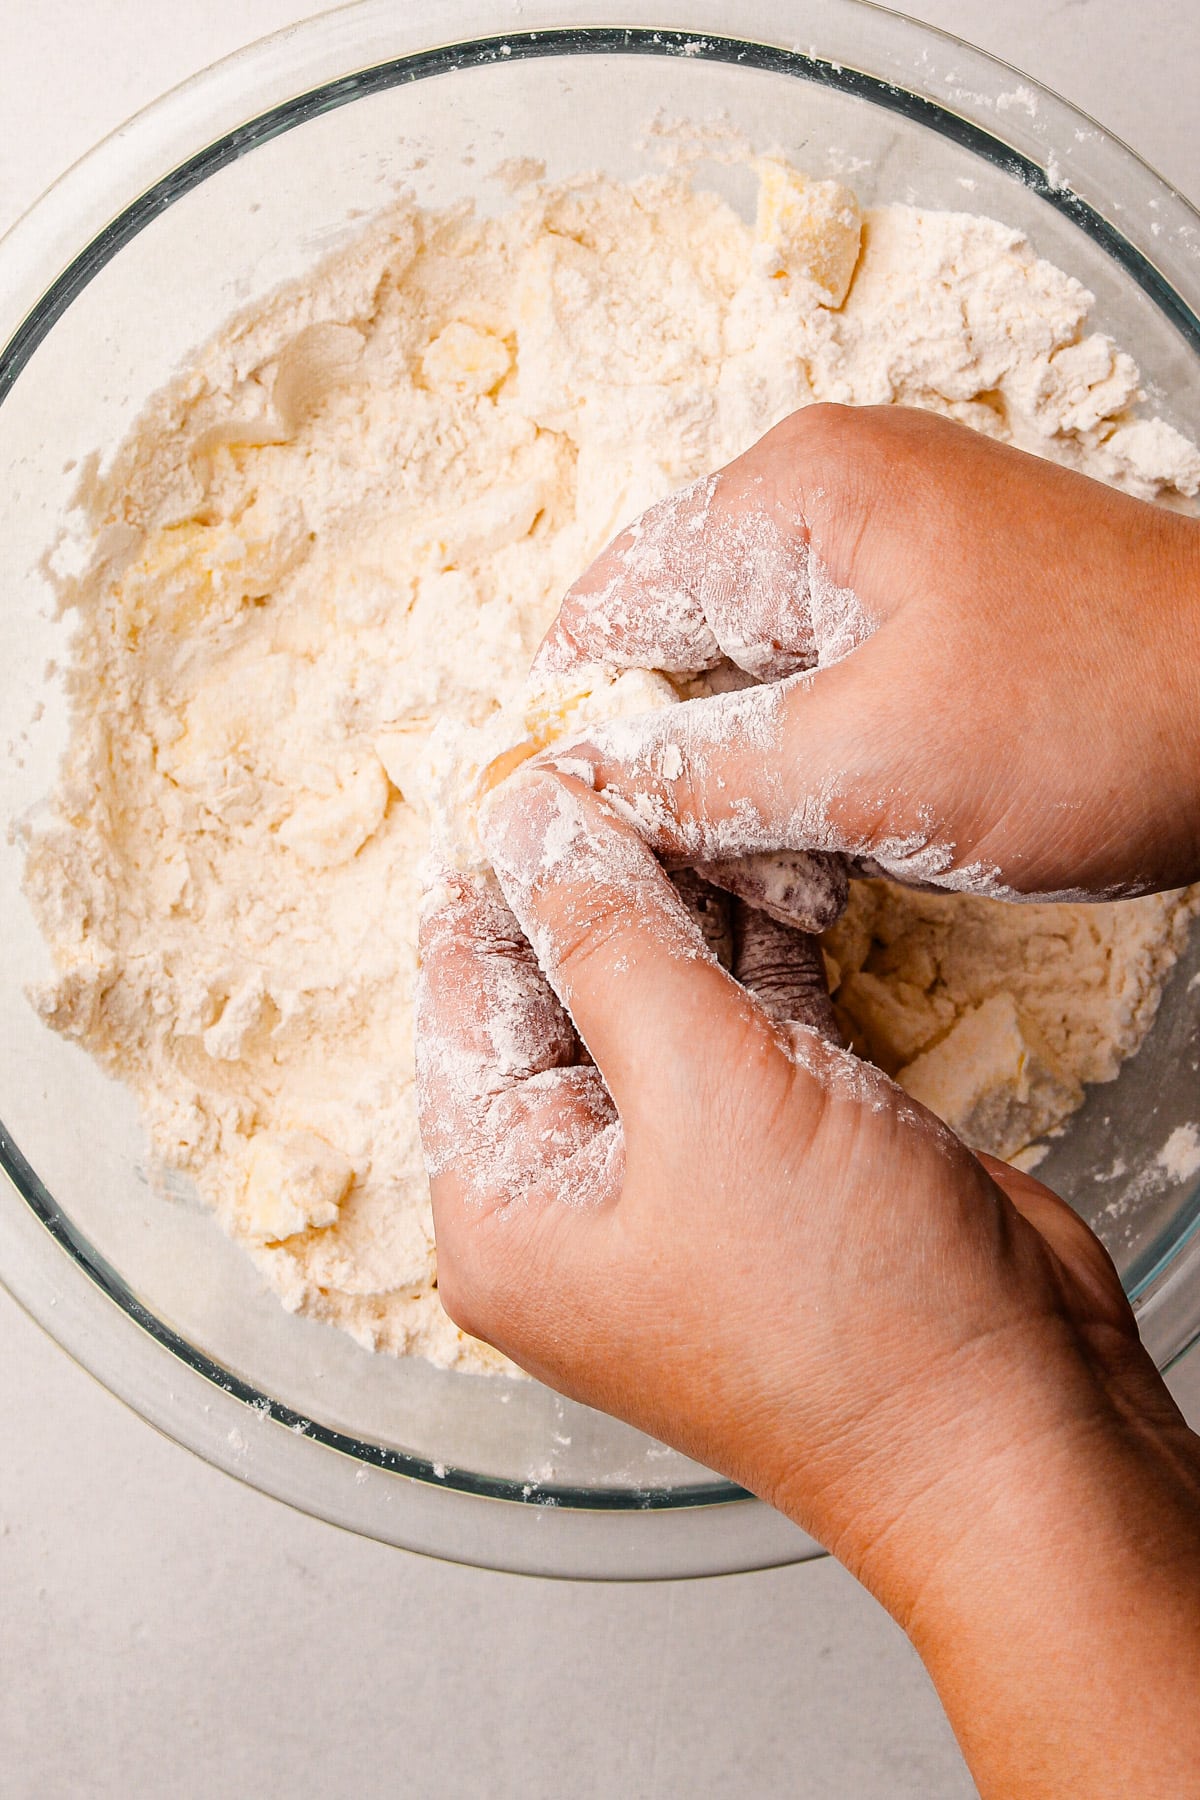 Two hands rubbing flour and butter together over a bowl with more flour and butter in it